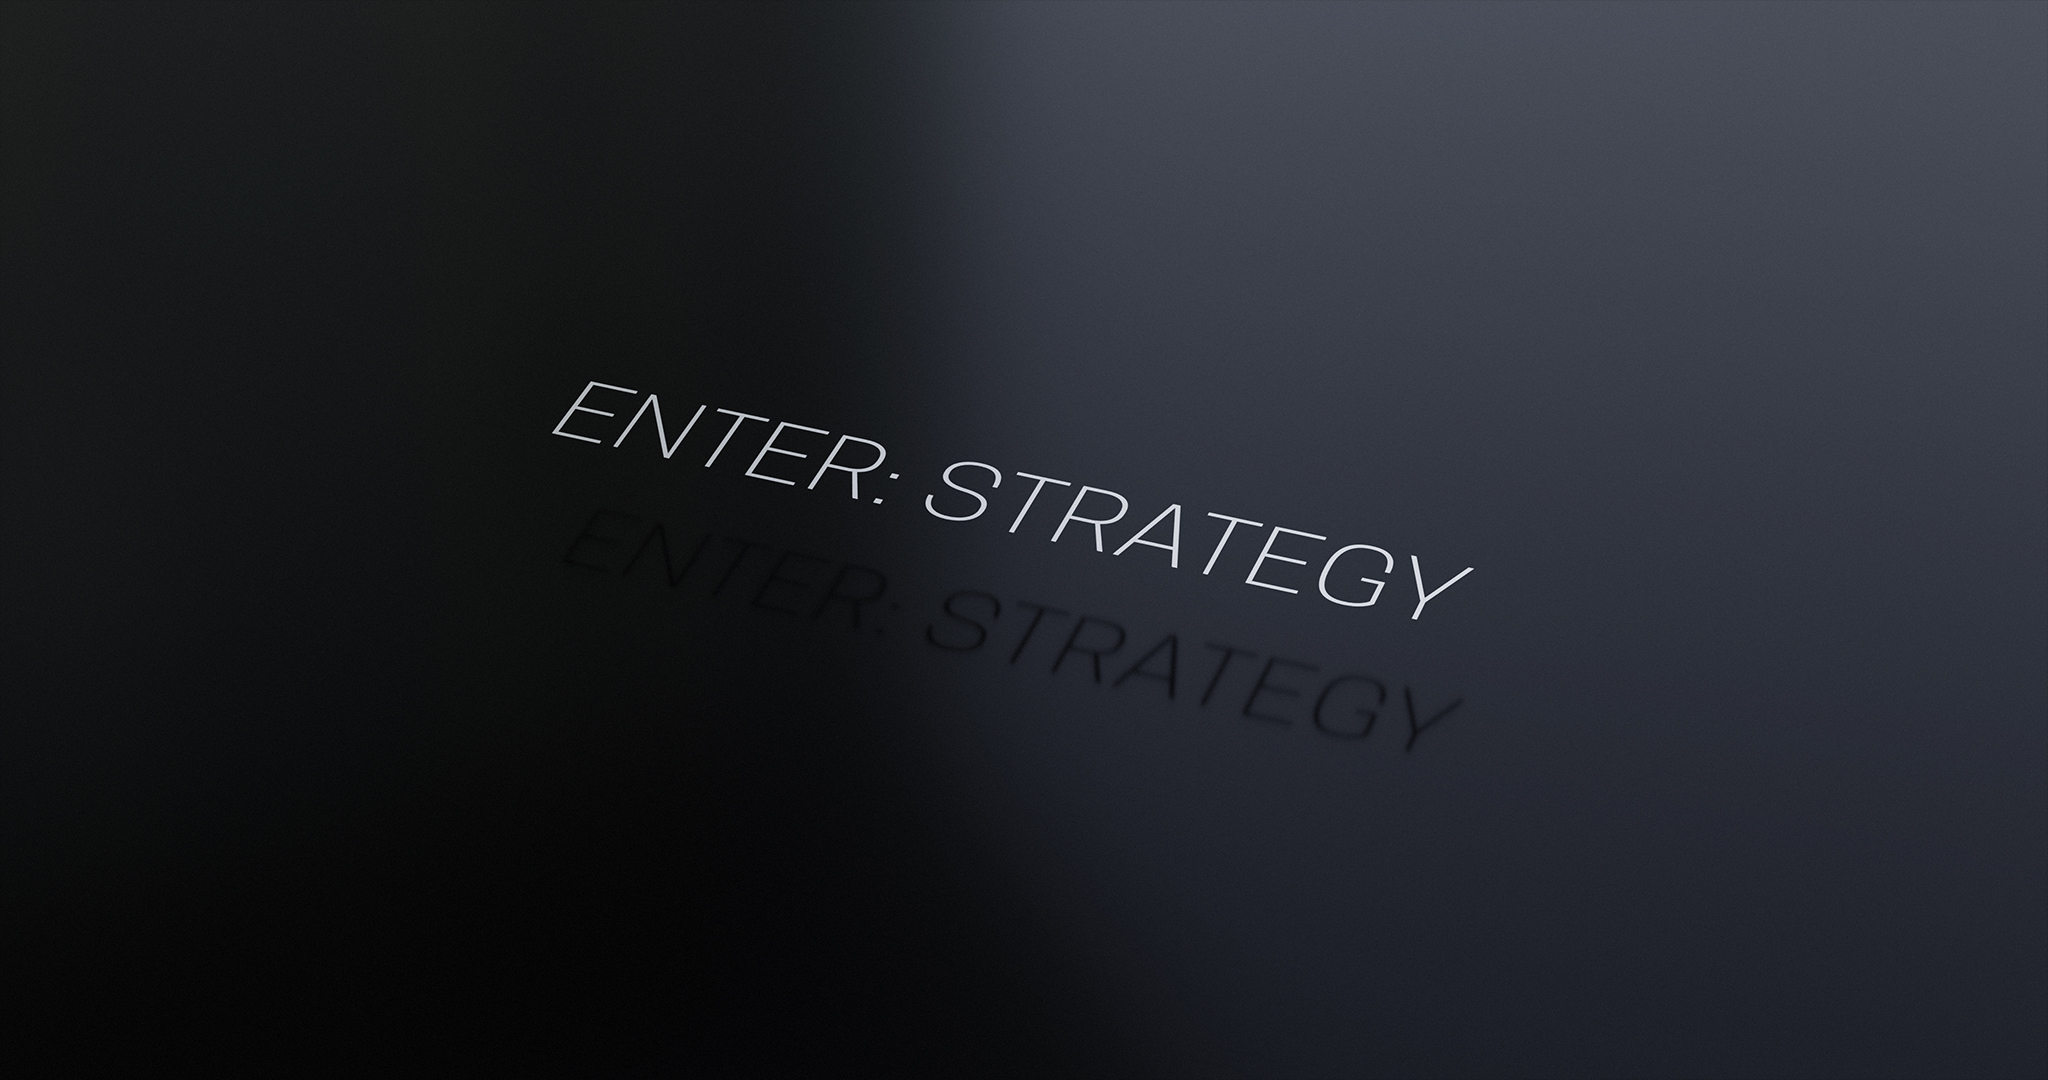 The words: ENTER: STRATEGY floating above a dark, metallic surface.